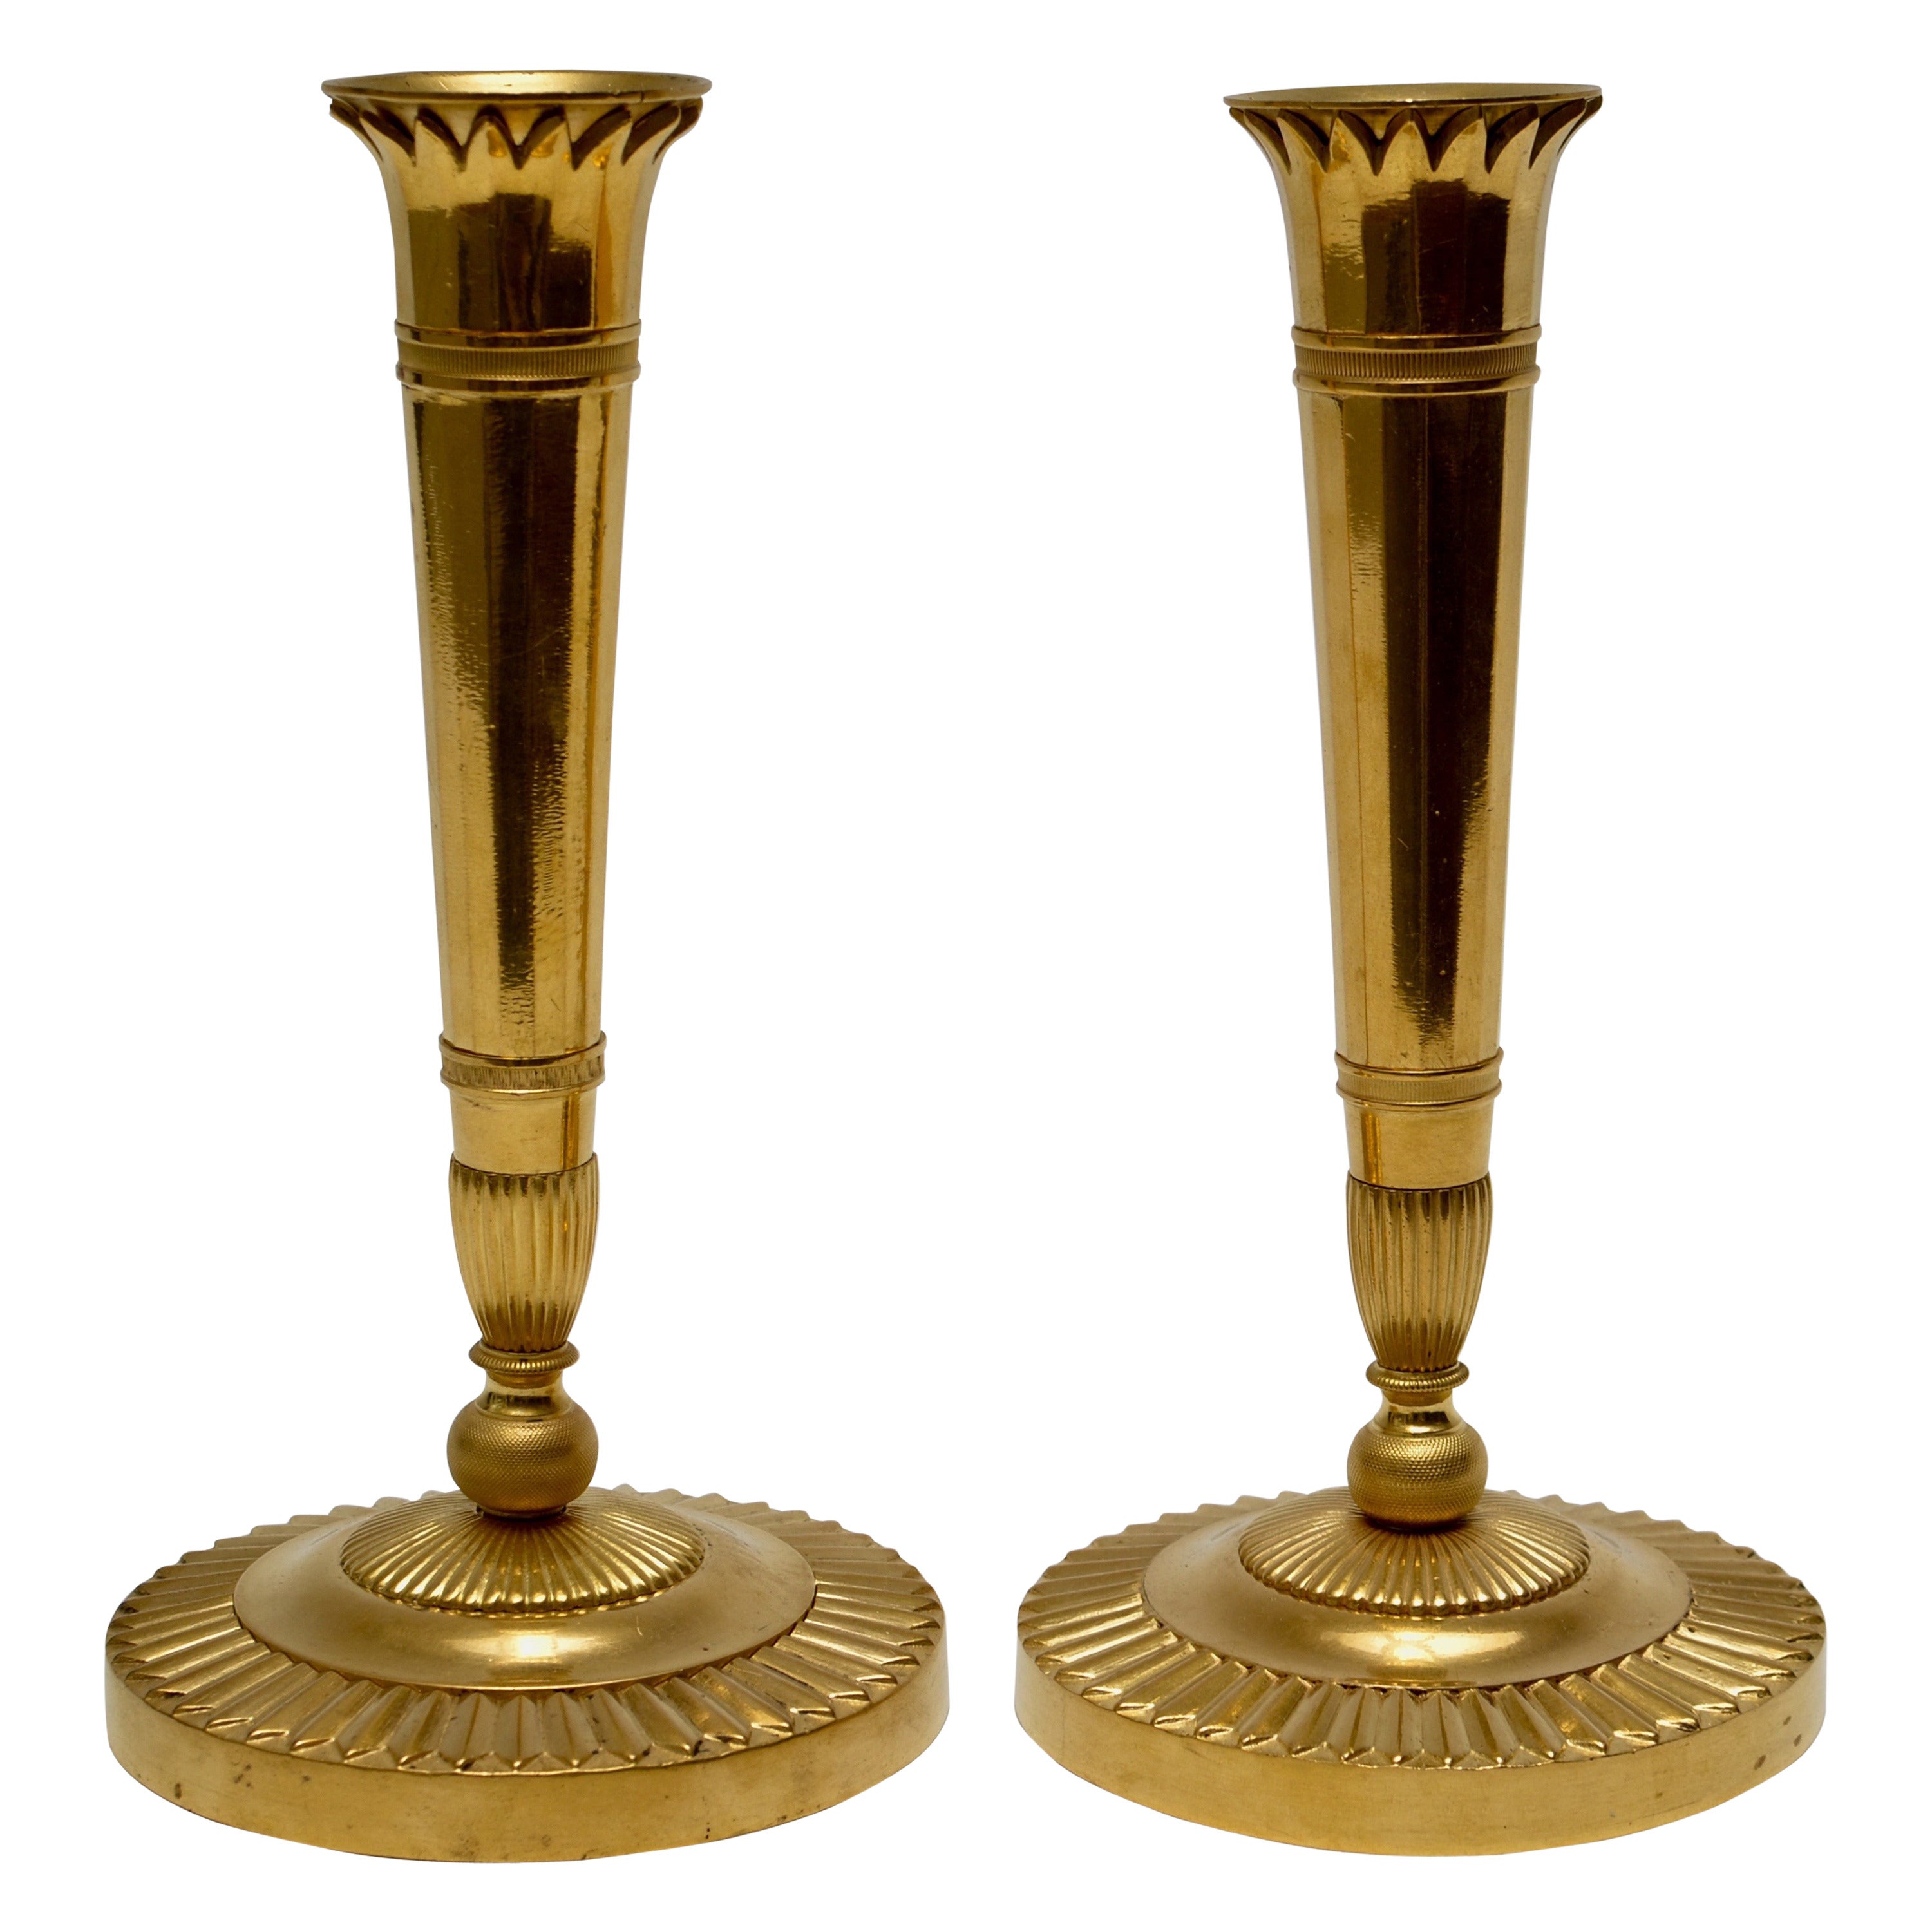 A pair of French empire gilt bronze candlesticks, early 19th century.